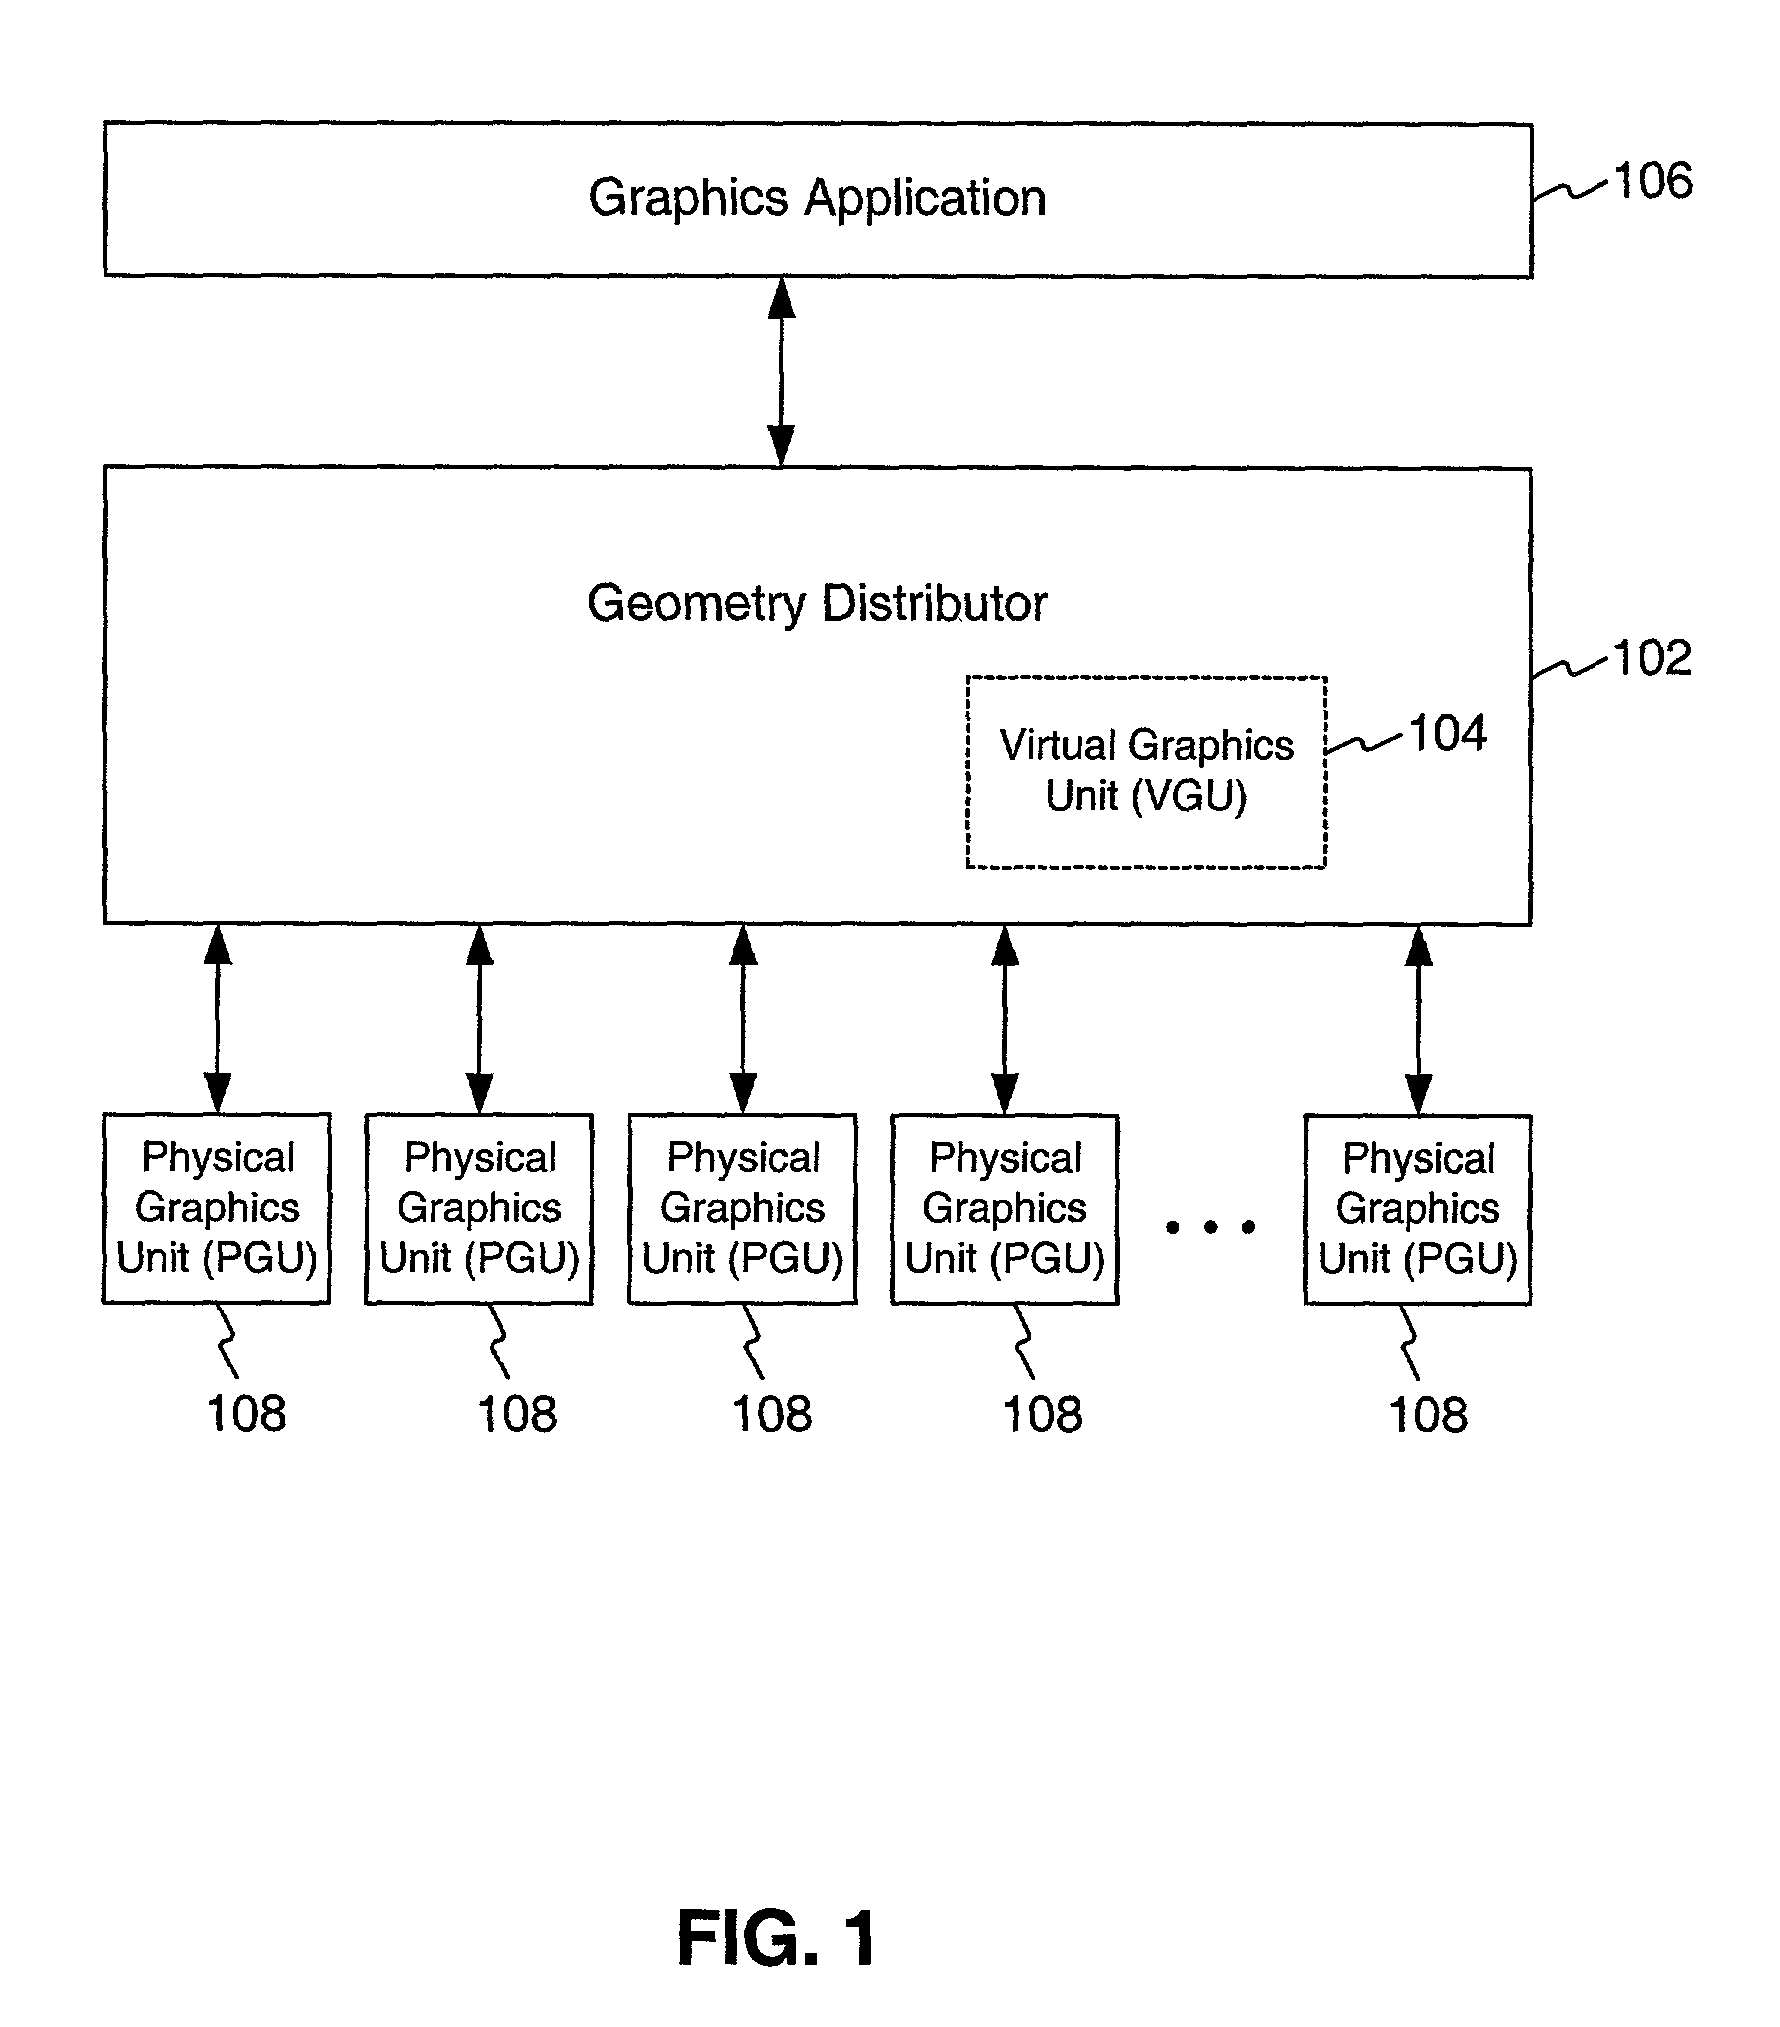 Method and system for minimizing an amount of data needed to test data against subarea boundaries in spatially composited digital video